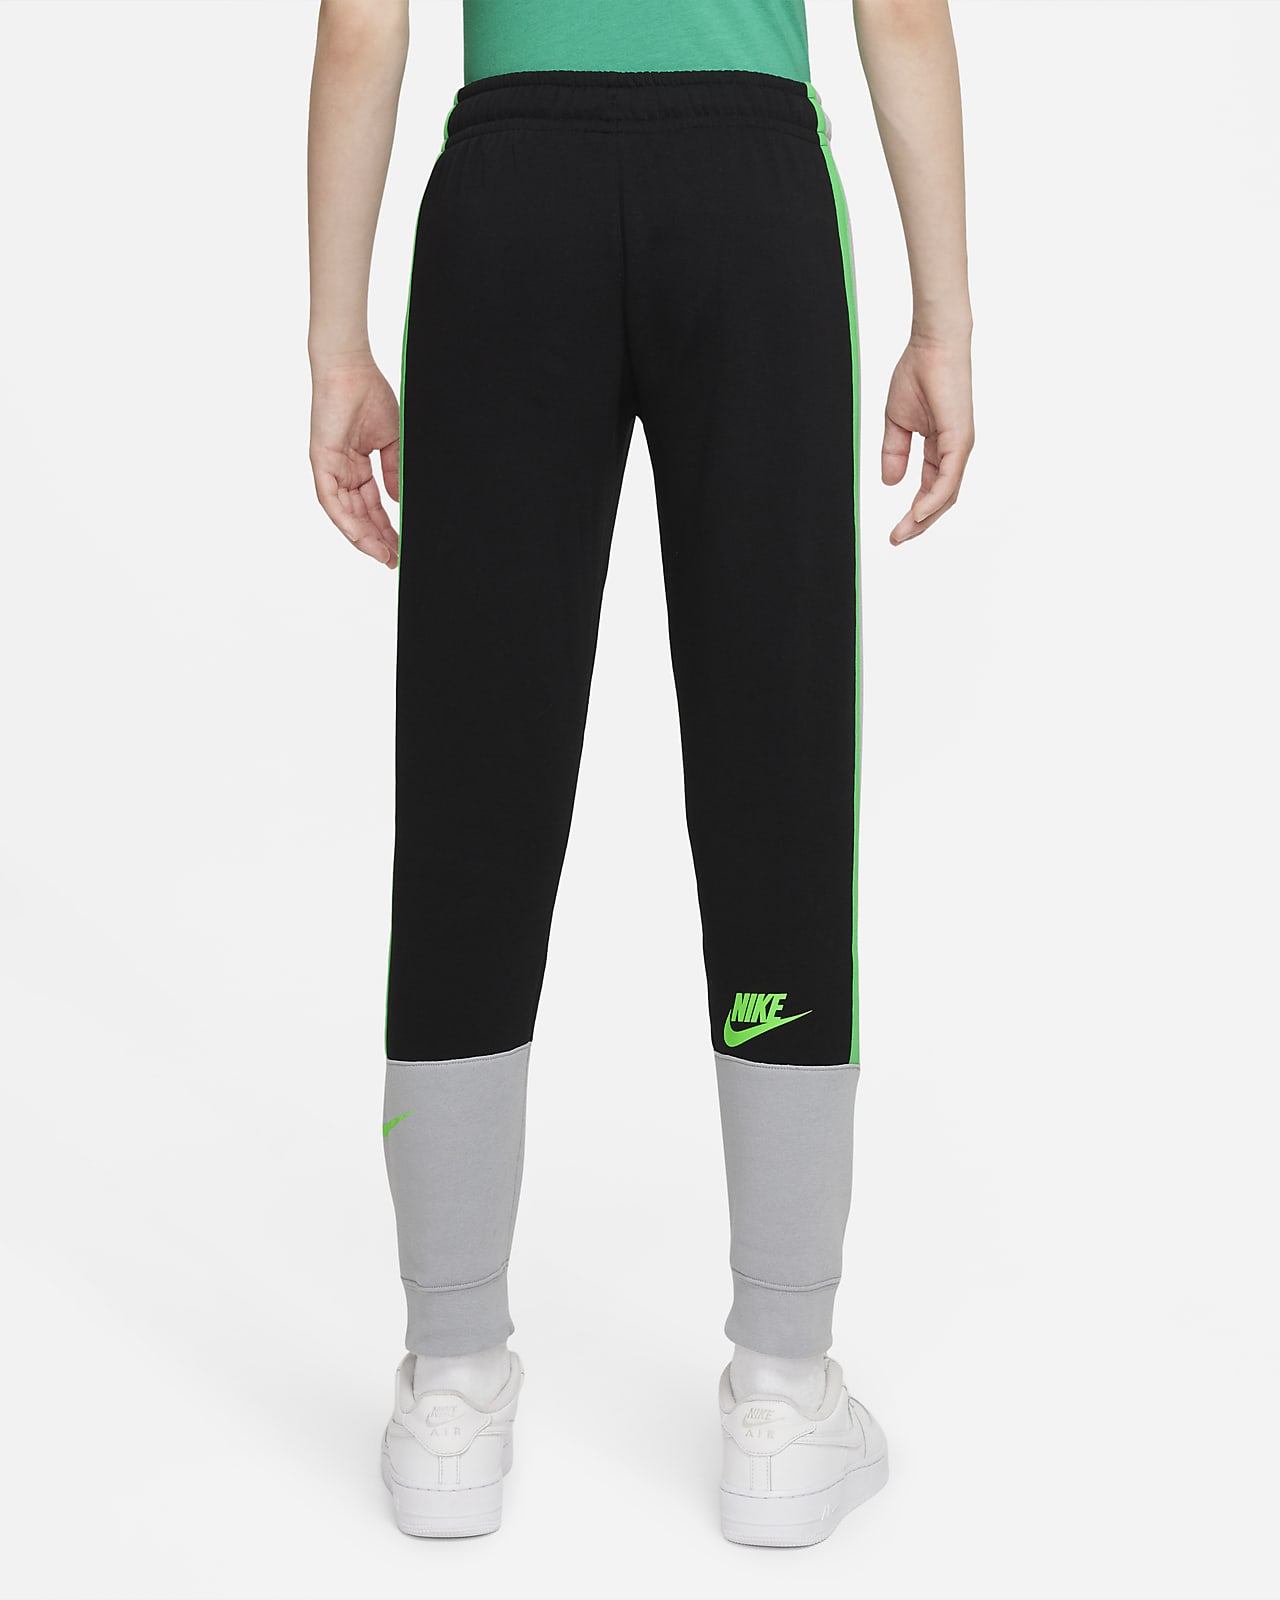 Stay comfortable and stylish with Nike Dri-Fit Pants